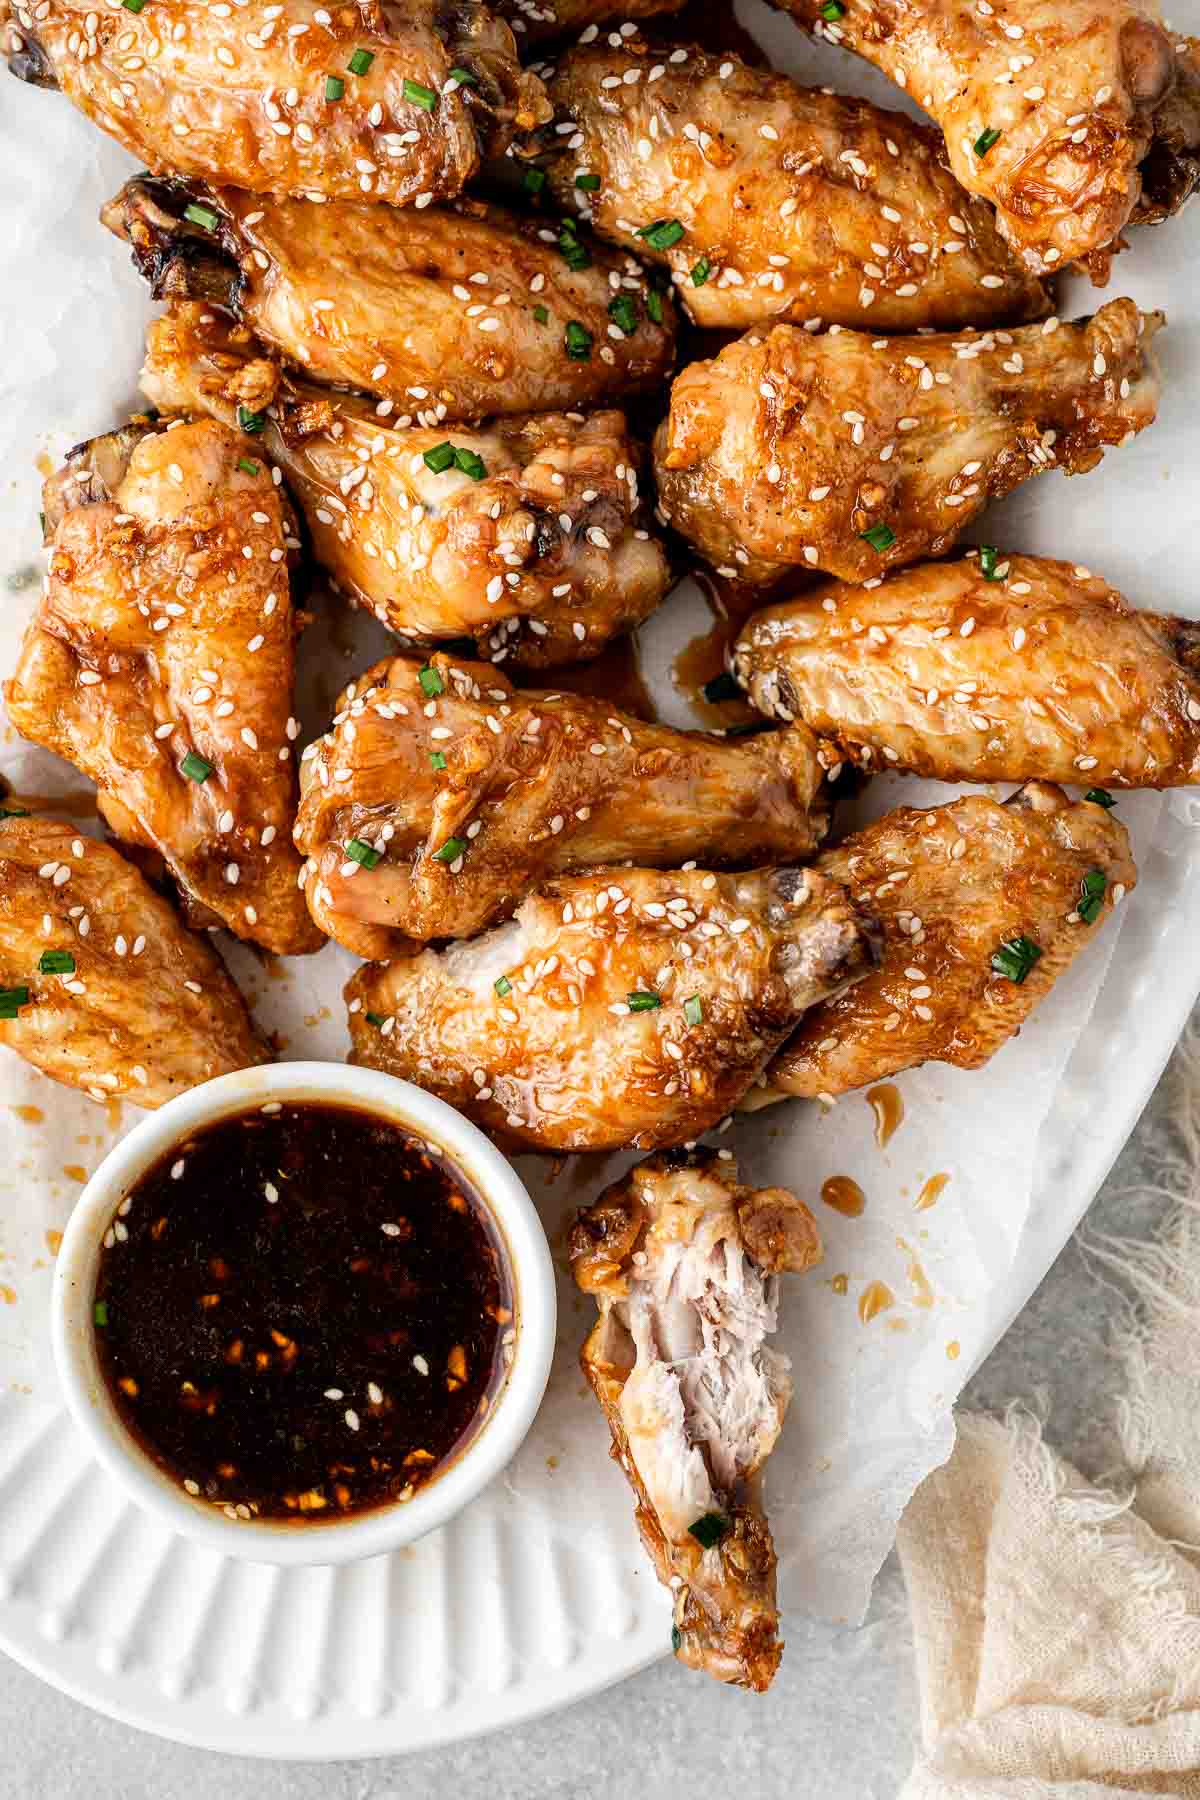 Chicken wings on a serving plate.